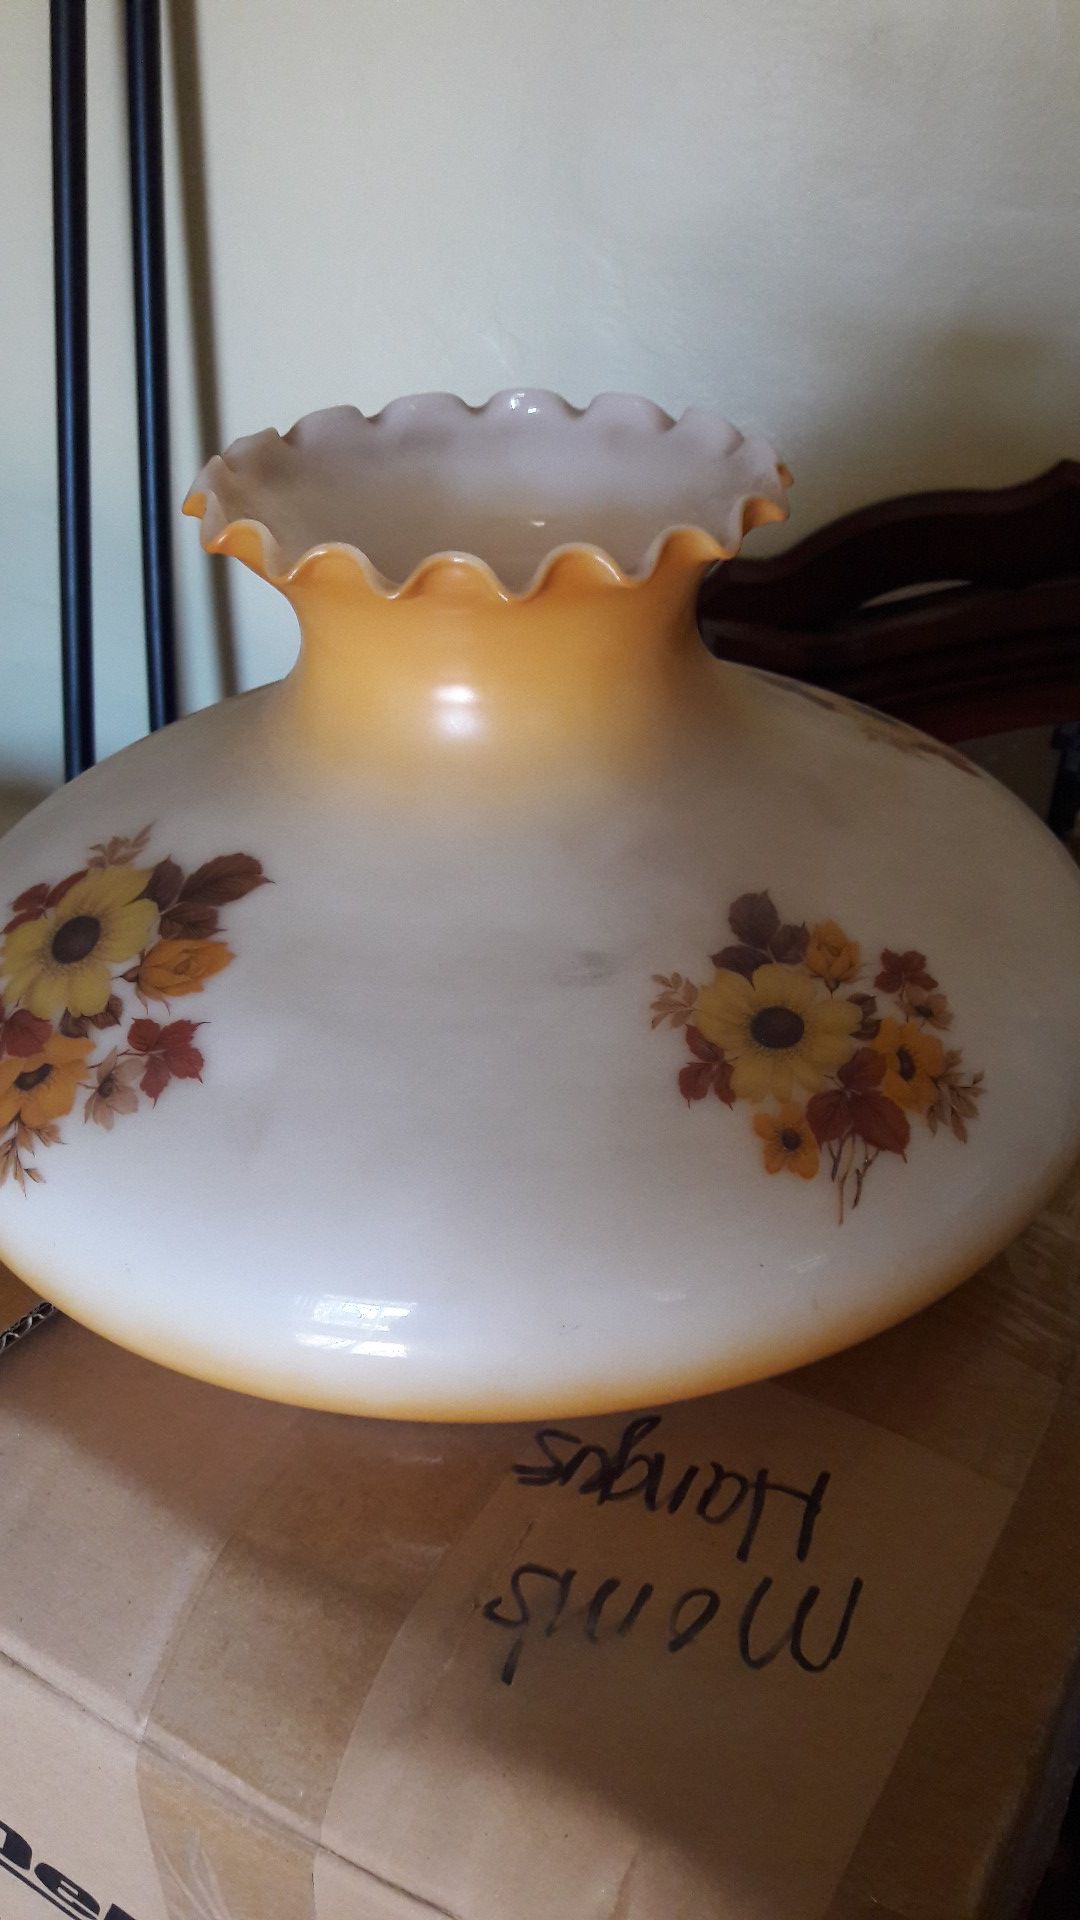 Antique glass lamp shade